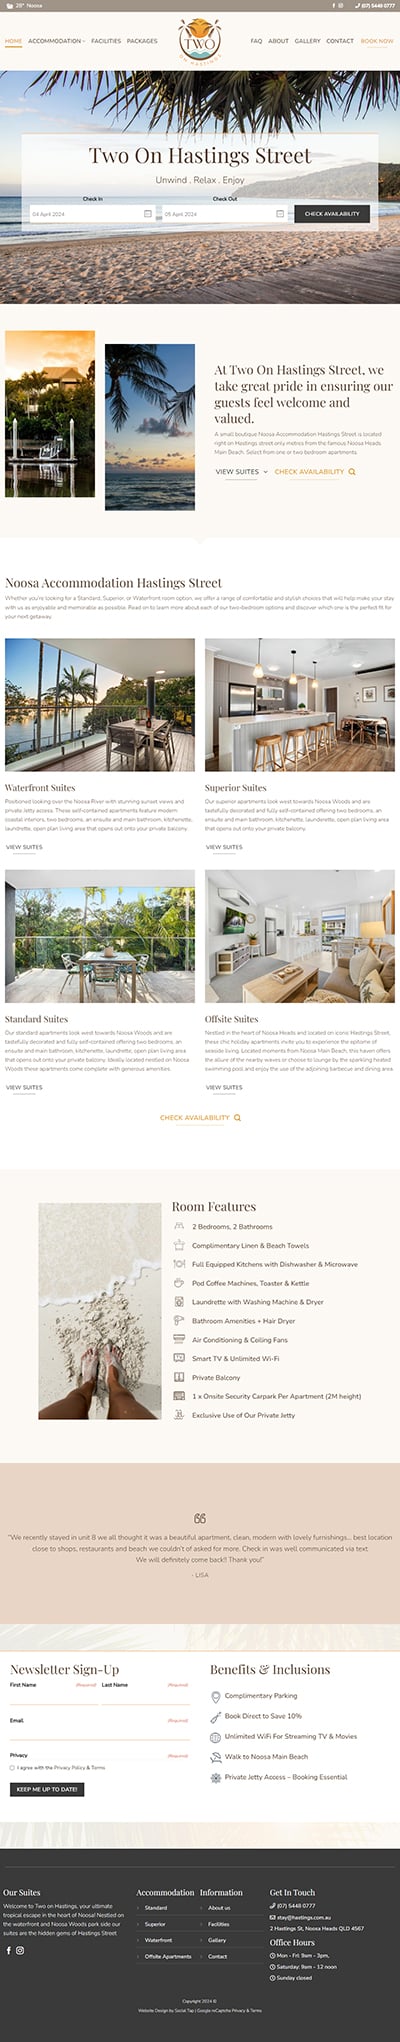 Our Work Hospitality Tourism Website Design Two On Hastings